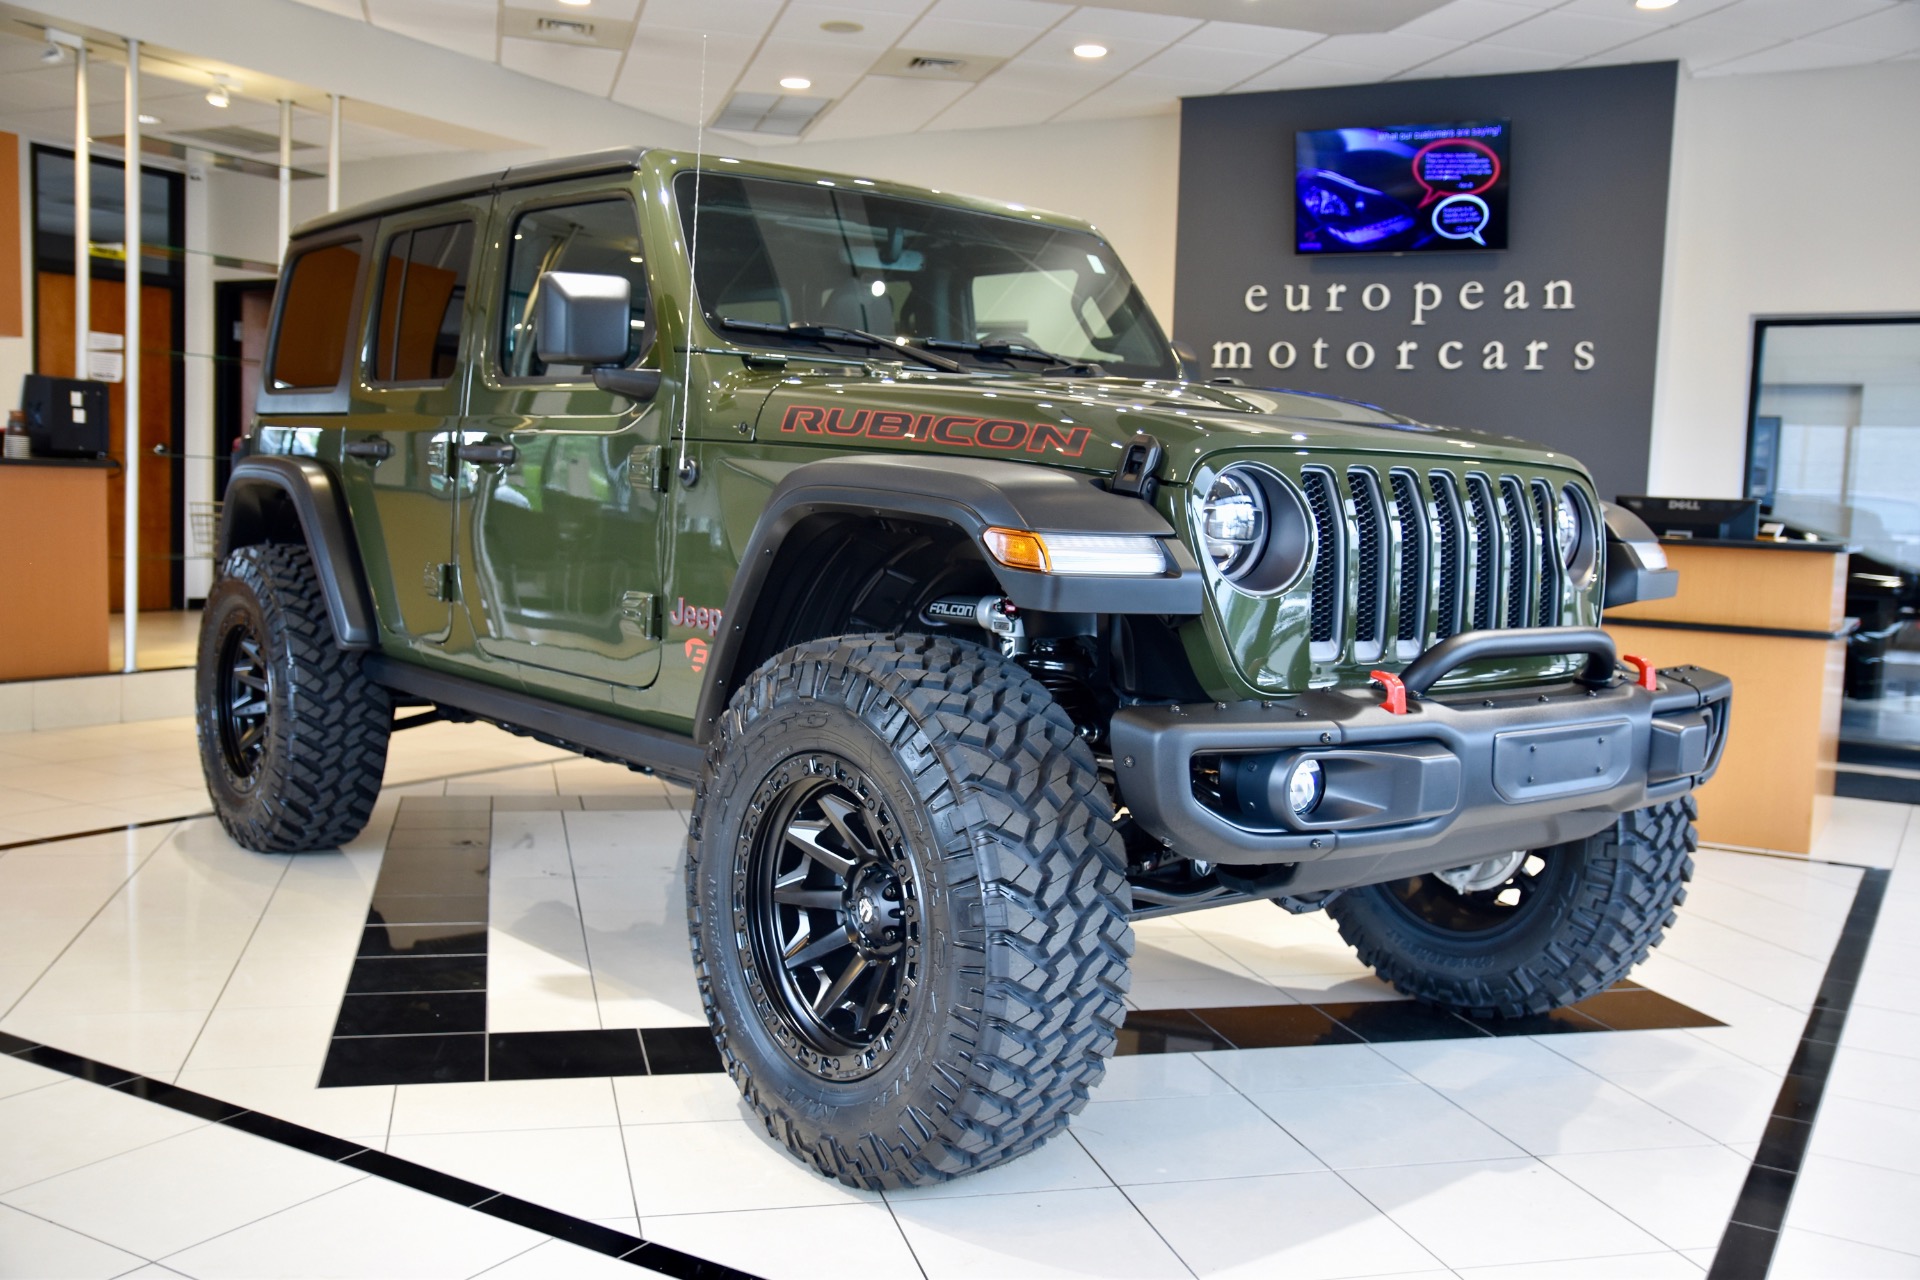 Used 2021 Jeep Wrangler Unlimited EMC CUSTOM LIFTED Rubicon For Sale (Sold)  European Motorcars Stock #549792